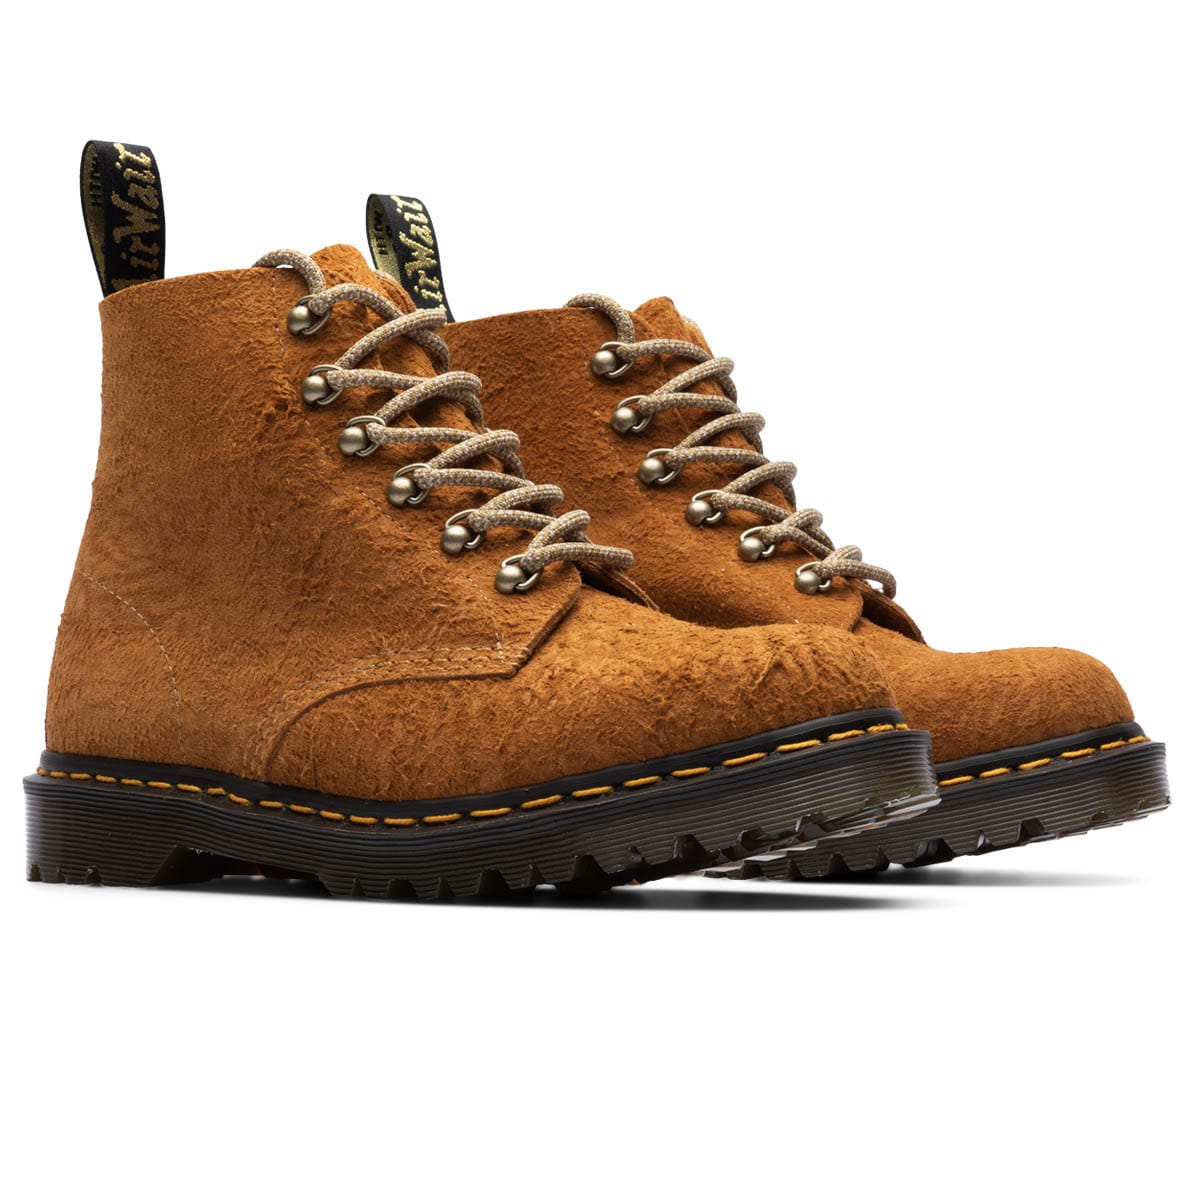 Dr. Martens Boots 101 SUEDE ANKLE BOOTS